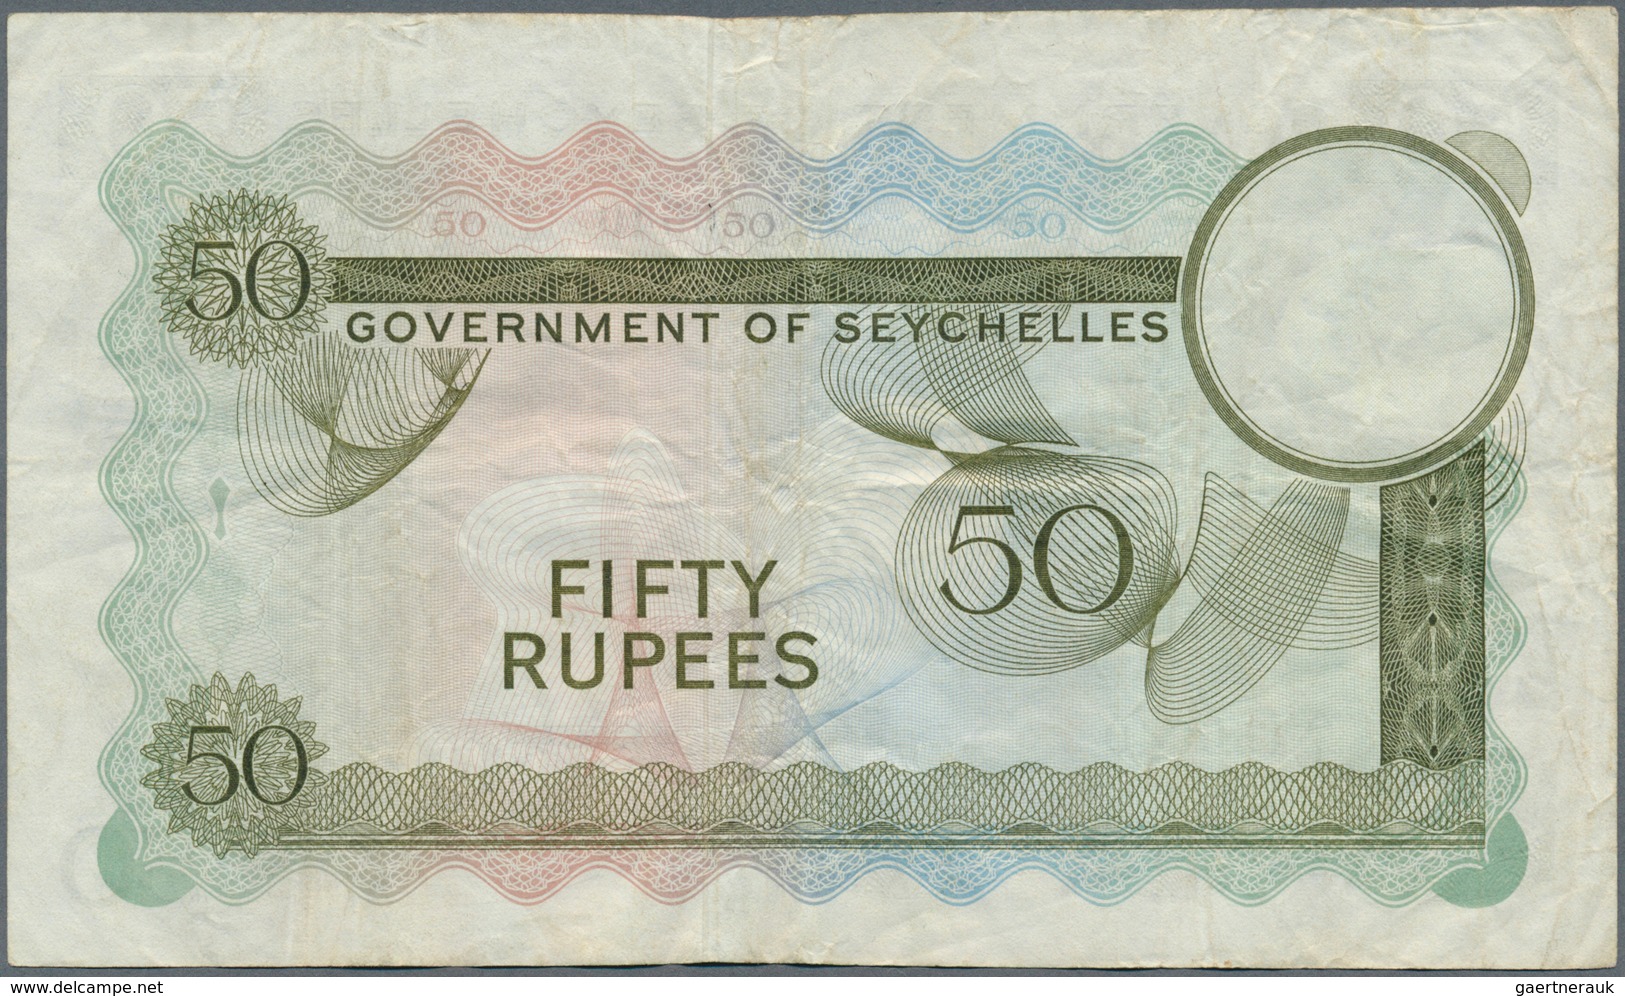 02356 Seychelles / Seychellen: Very nice lot with 6 notes of the 50 Rupees SEX note, comprising two pieces